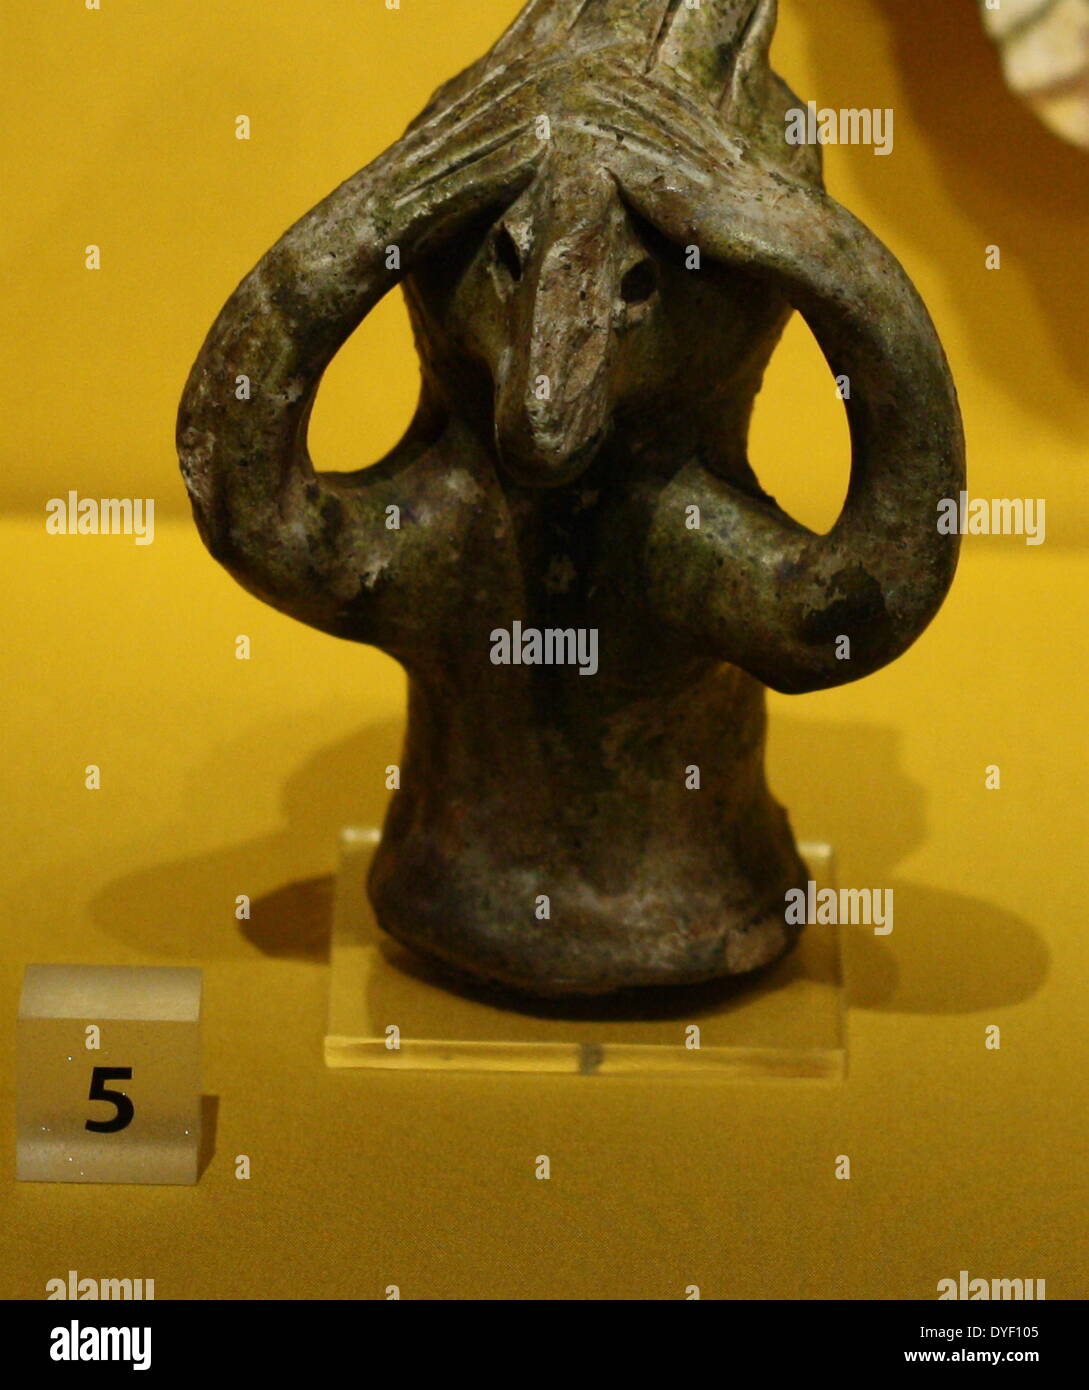 Roof adornment (finial) made from fired clay. Circa 13th-14th century. The figure is in the form of an imaginary animal. Stock Photo